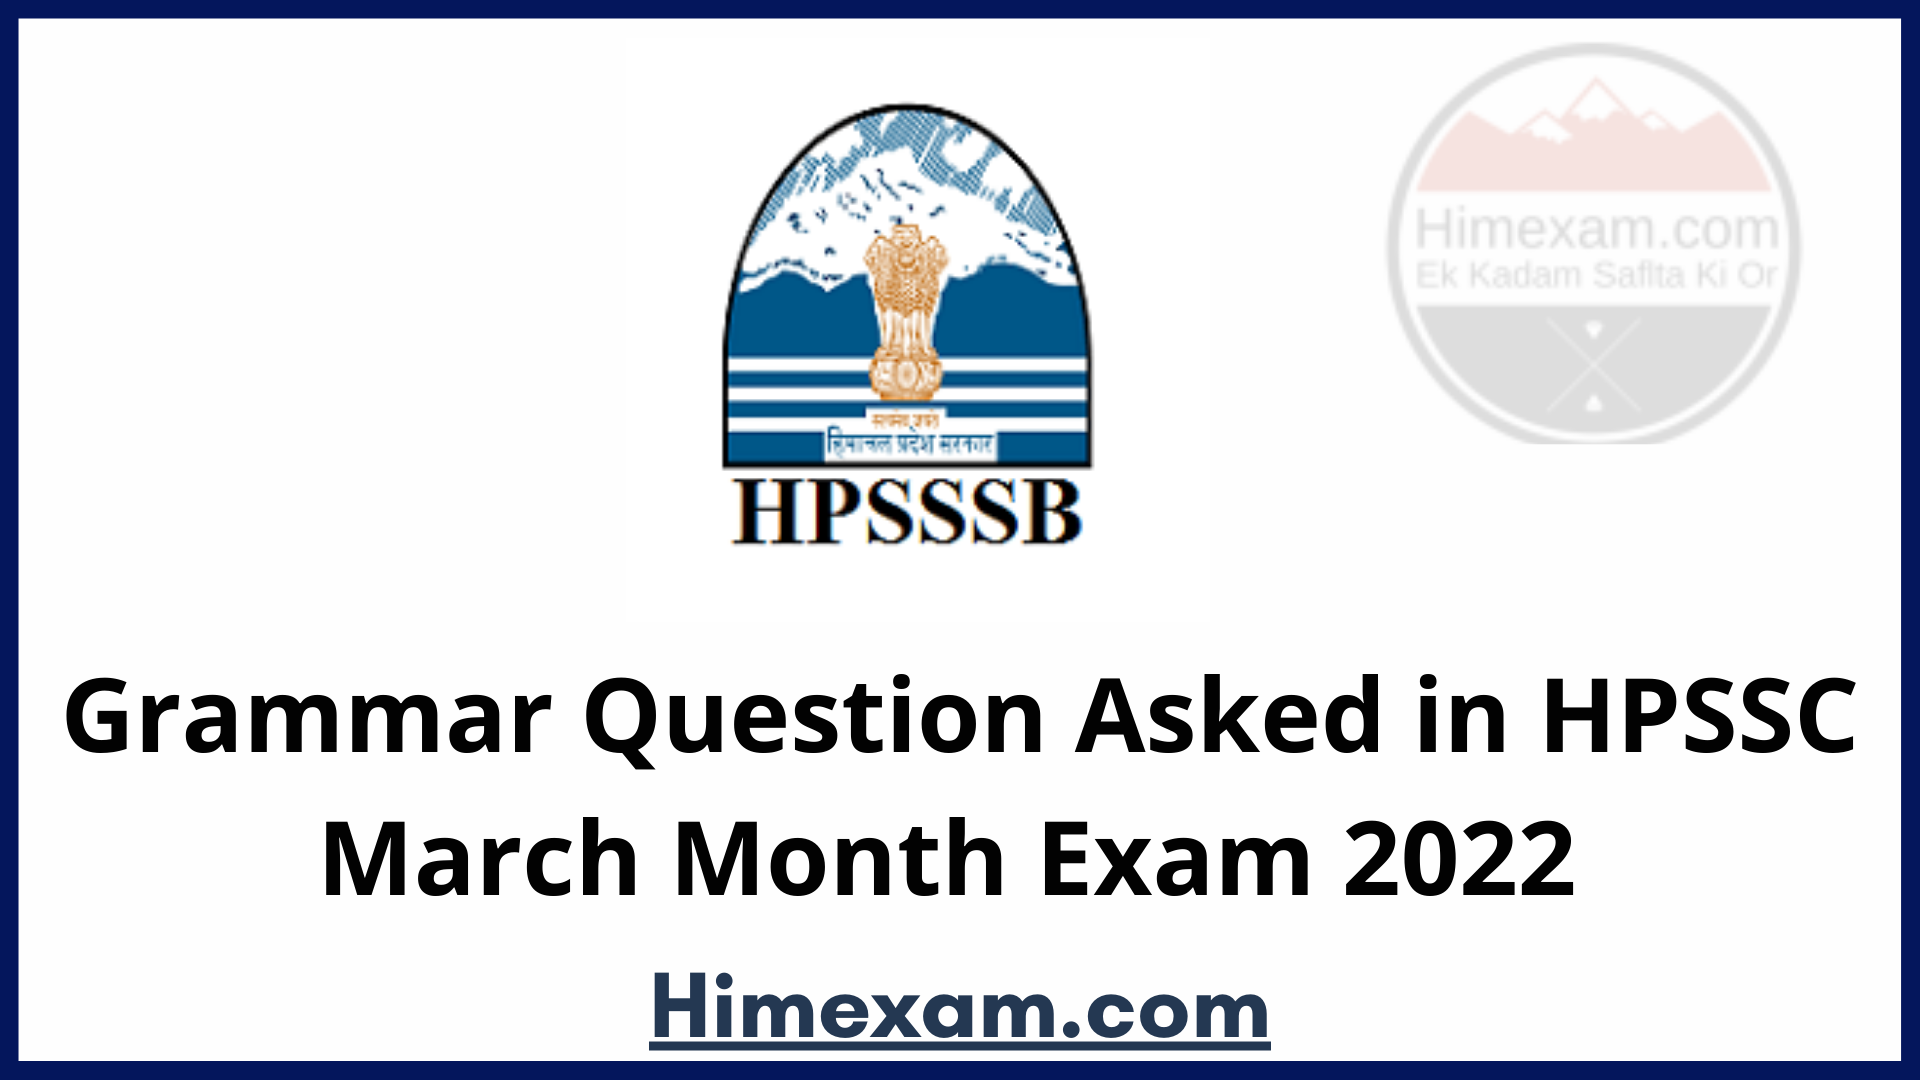 Grammar Question Asked in HPSSC March Month Exam 2022